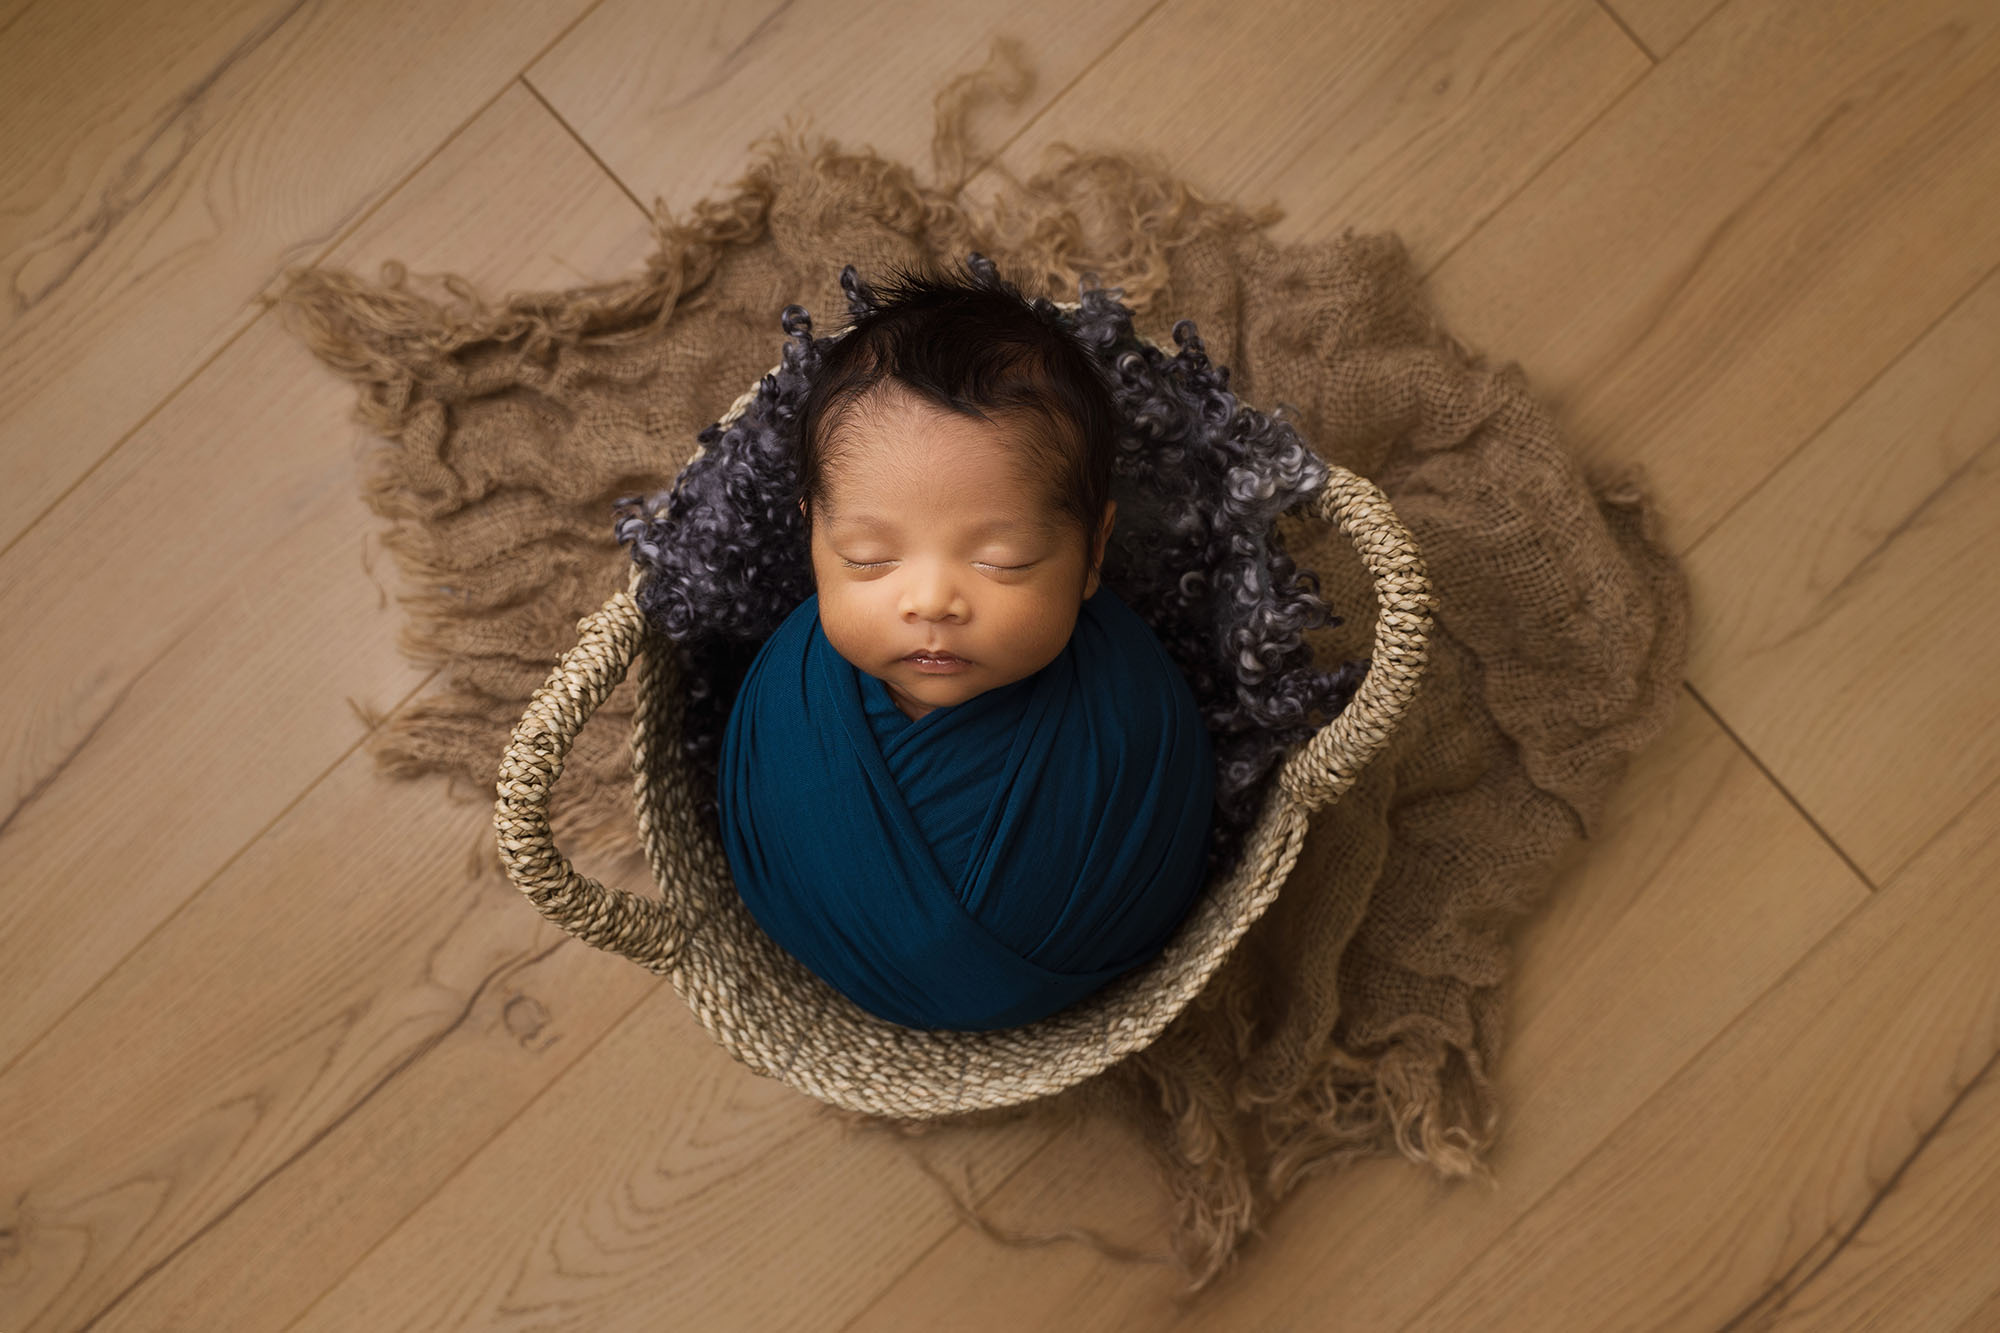 Top tips for booking your newborn session